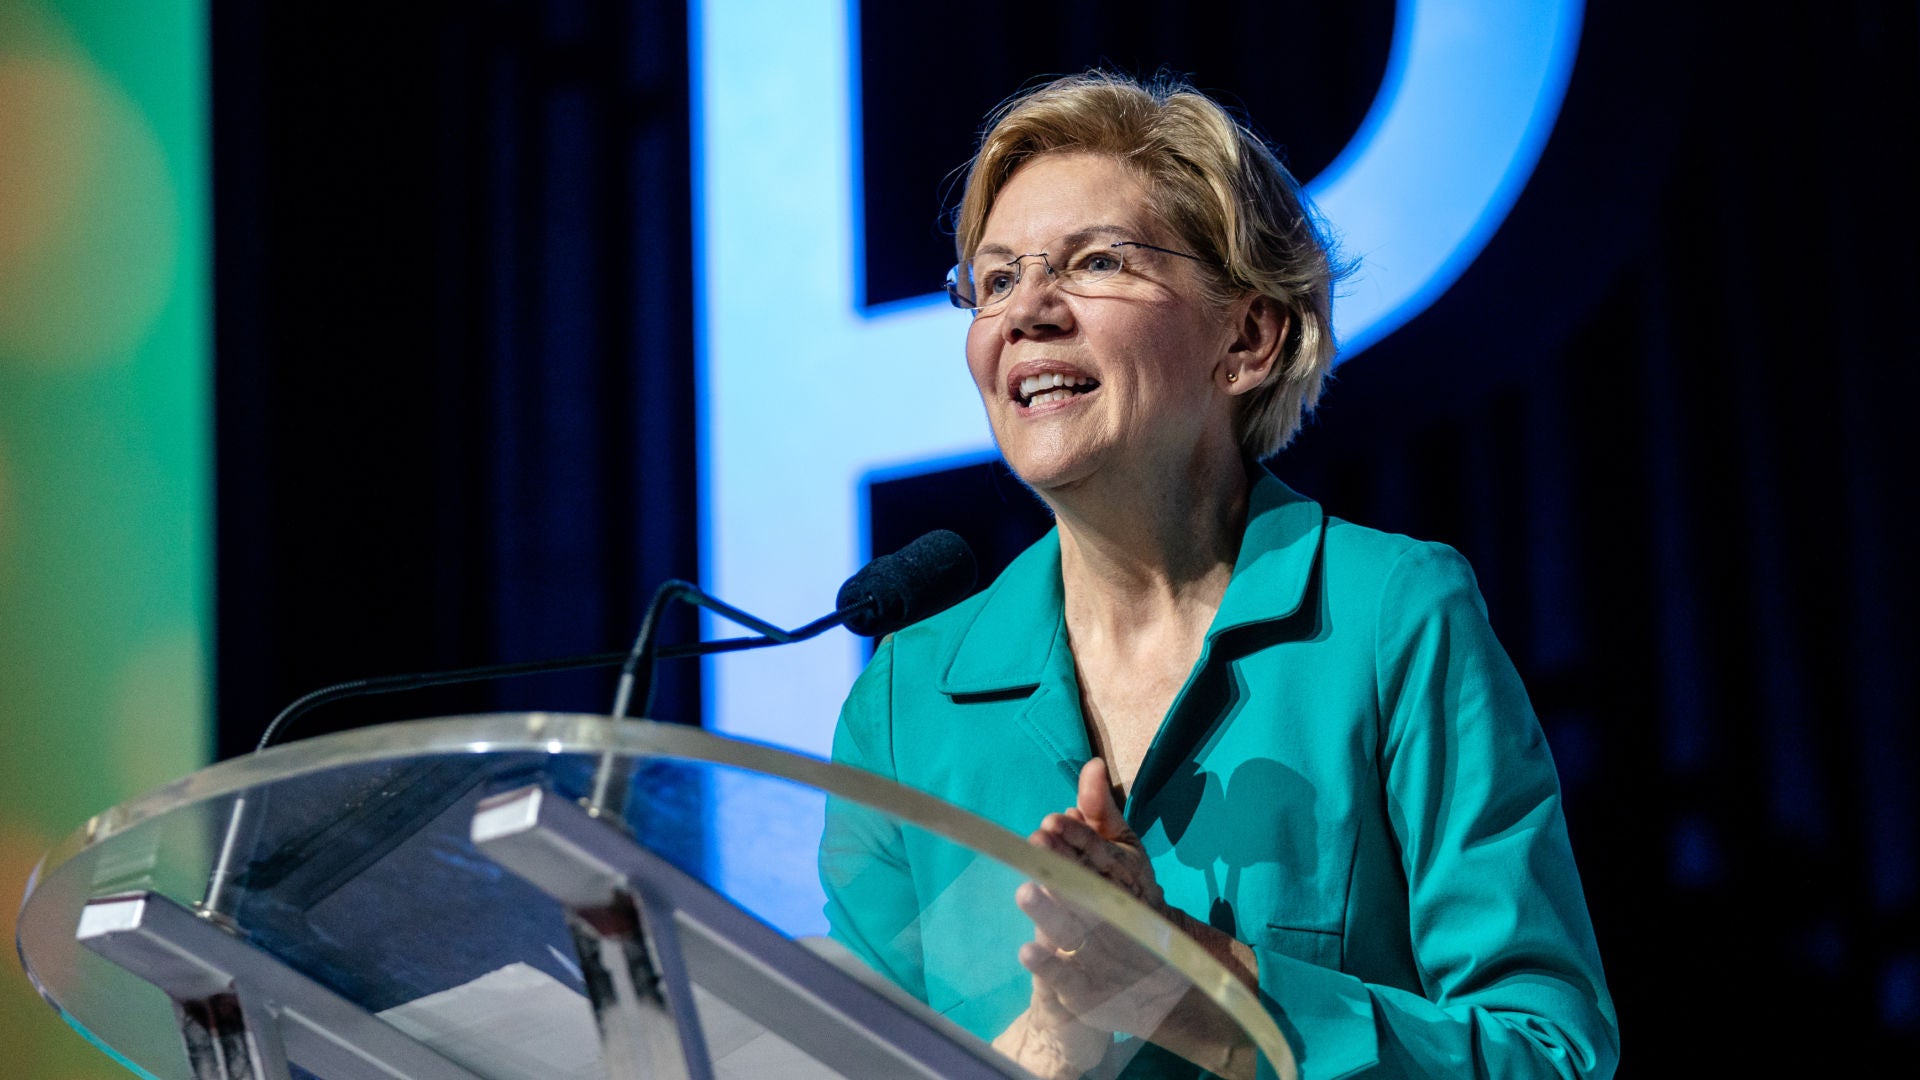 What Other Candidates Can Take From Elizabeth Warren's Campaign